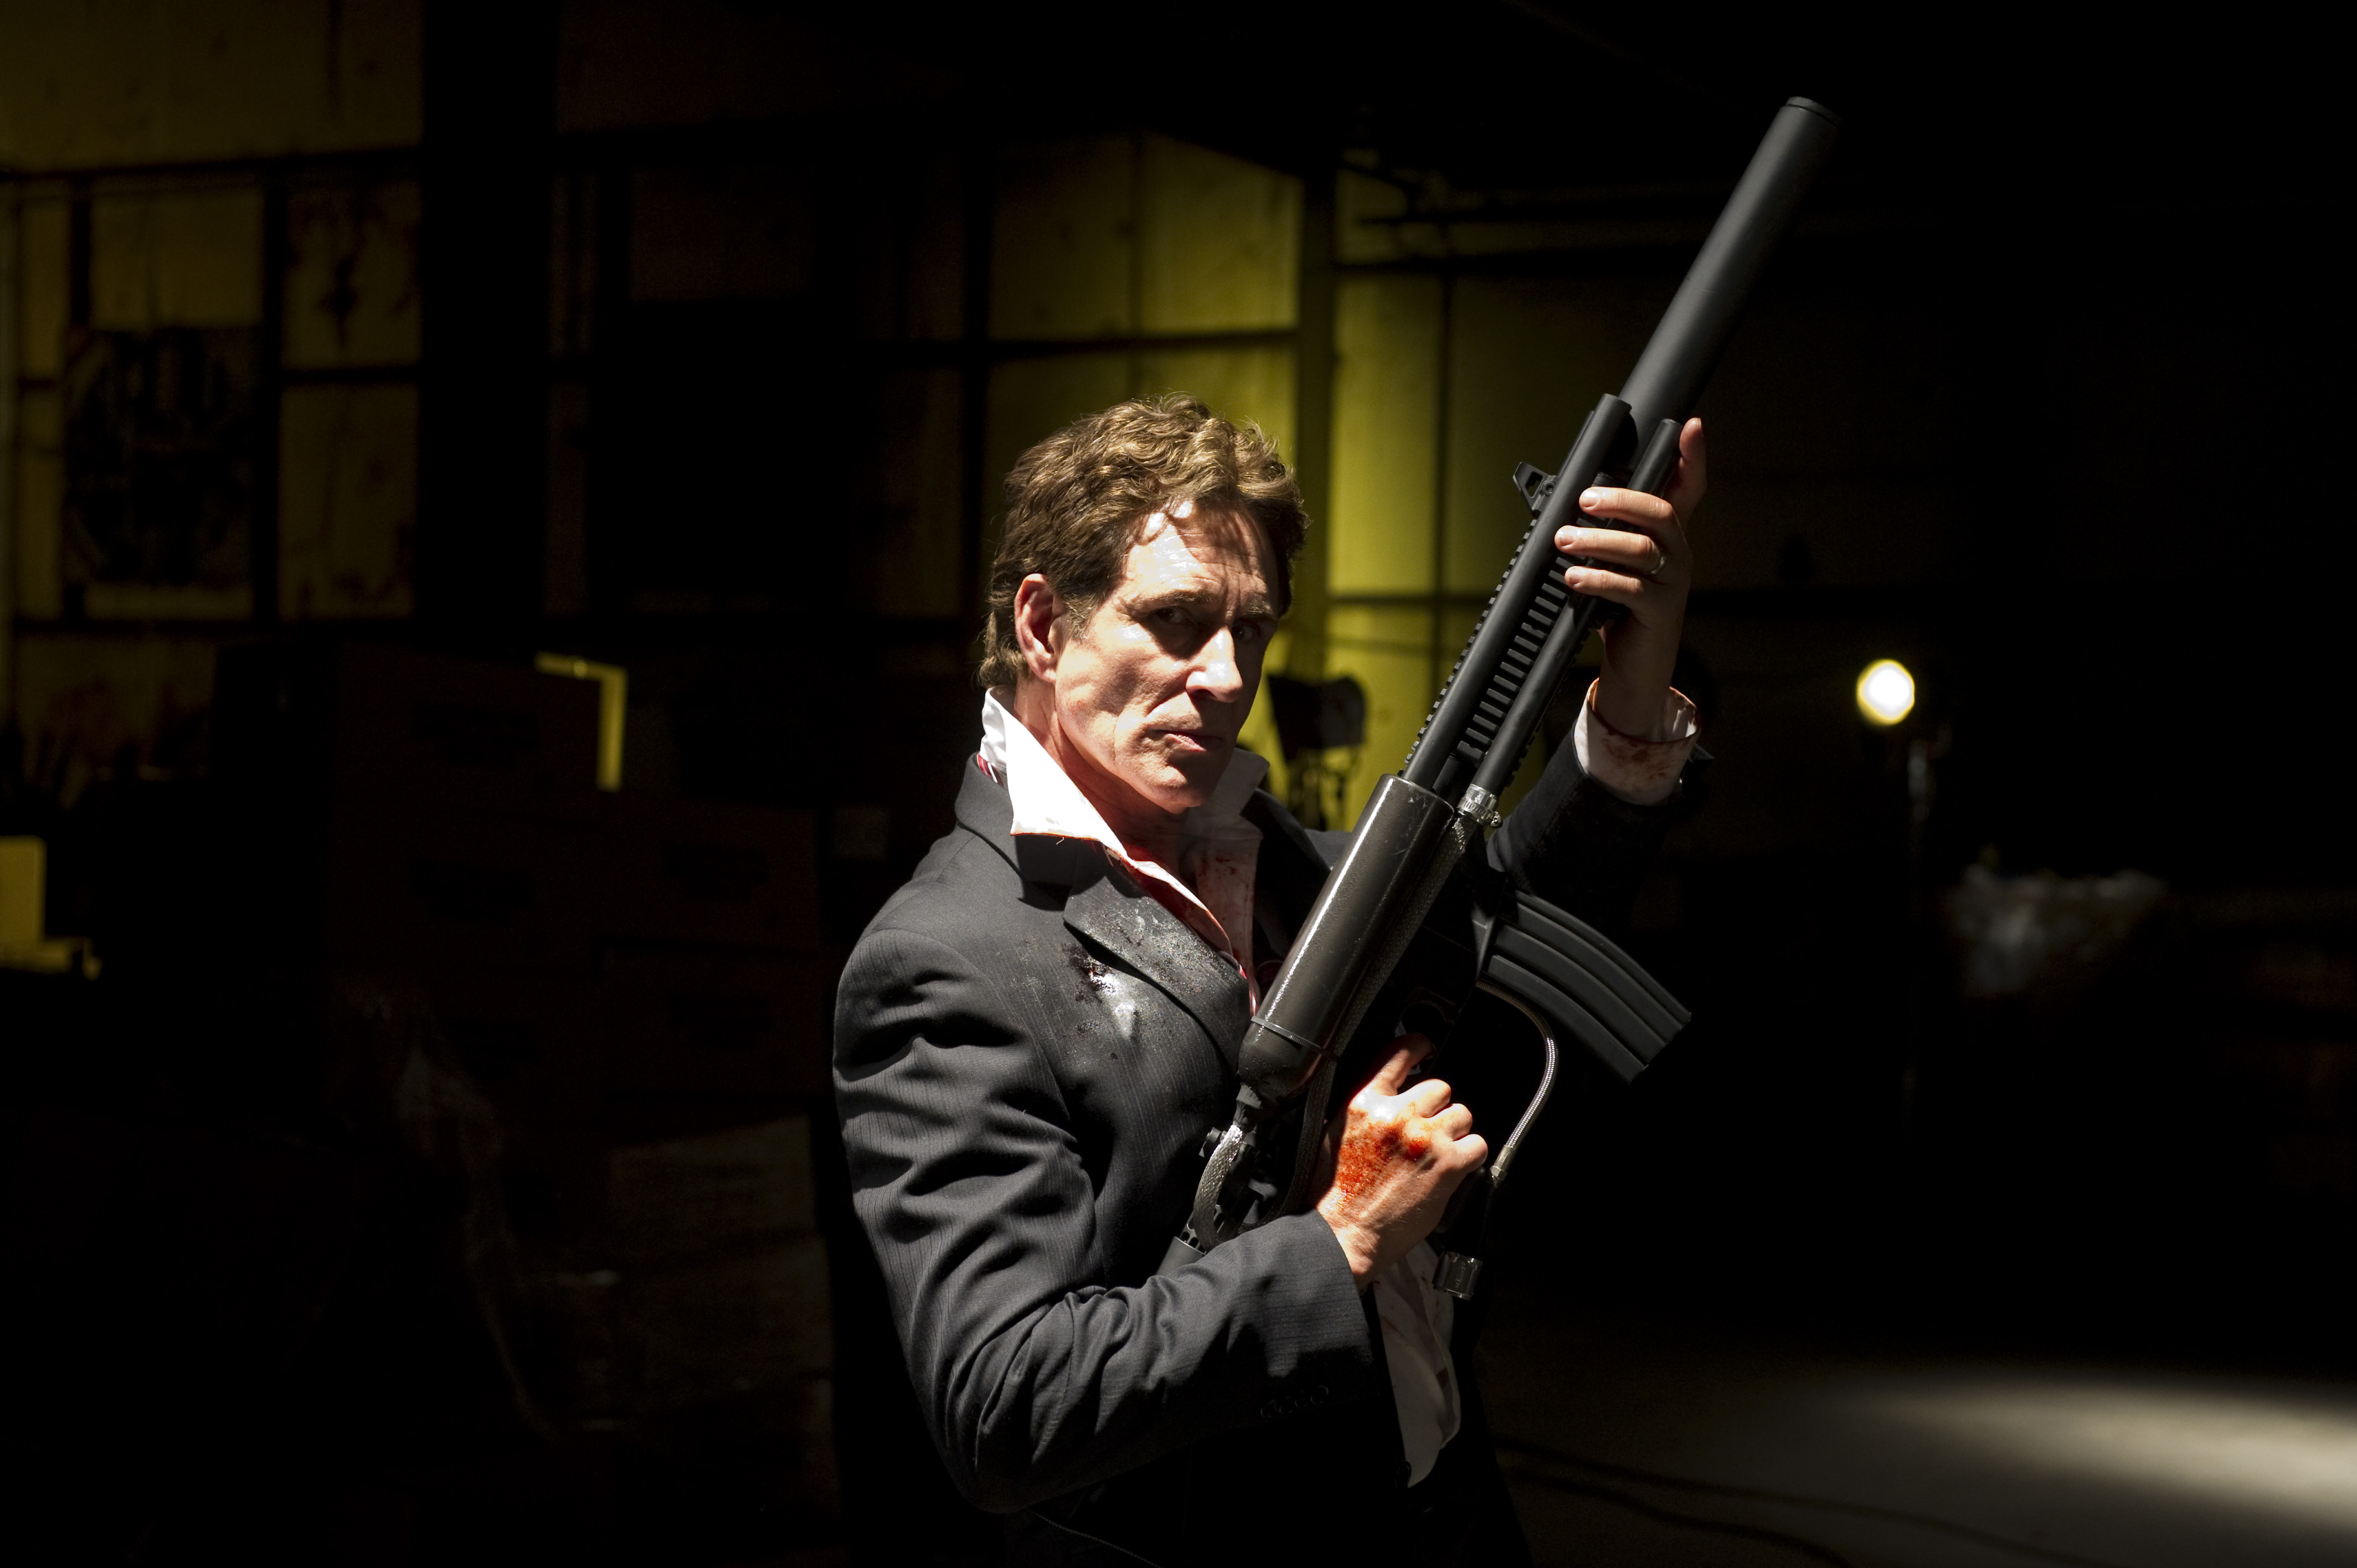 Actor John Shea poses with the hero weapon used in the film: 51. This weapon entitled The POW (pulse operating weapon) was built in 3 days and modeled after a air-blast rifle in 1960's. FYI: John loved posing with this weapon.